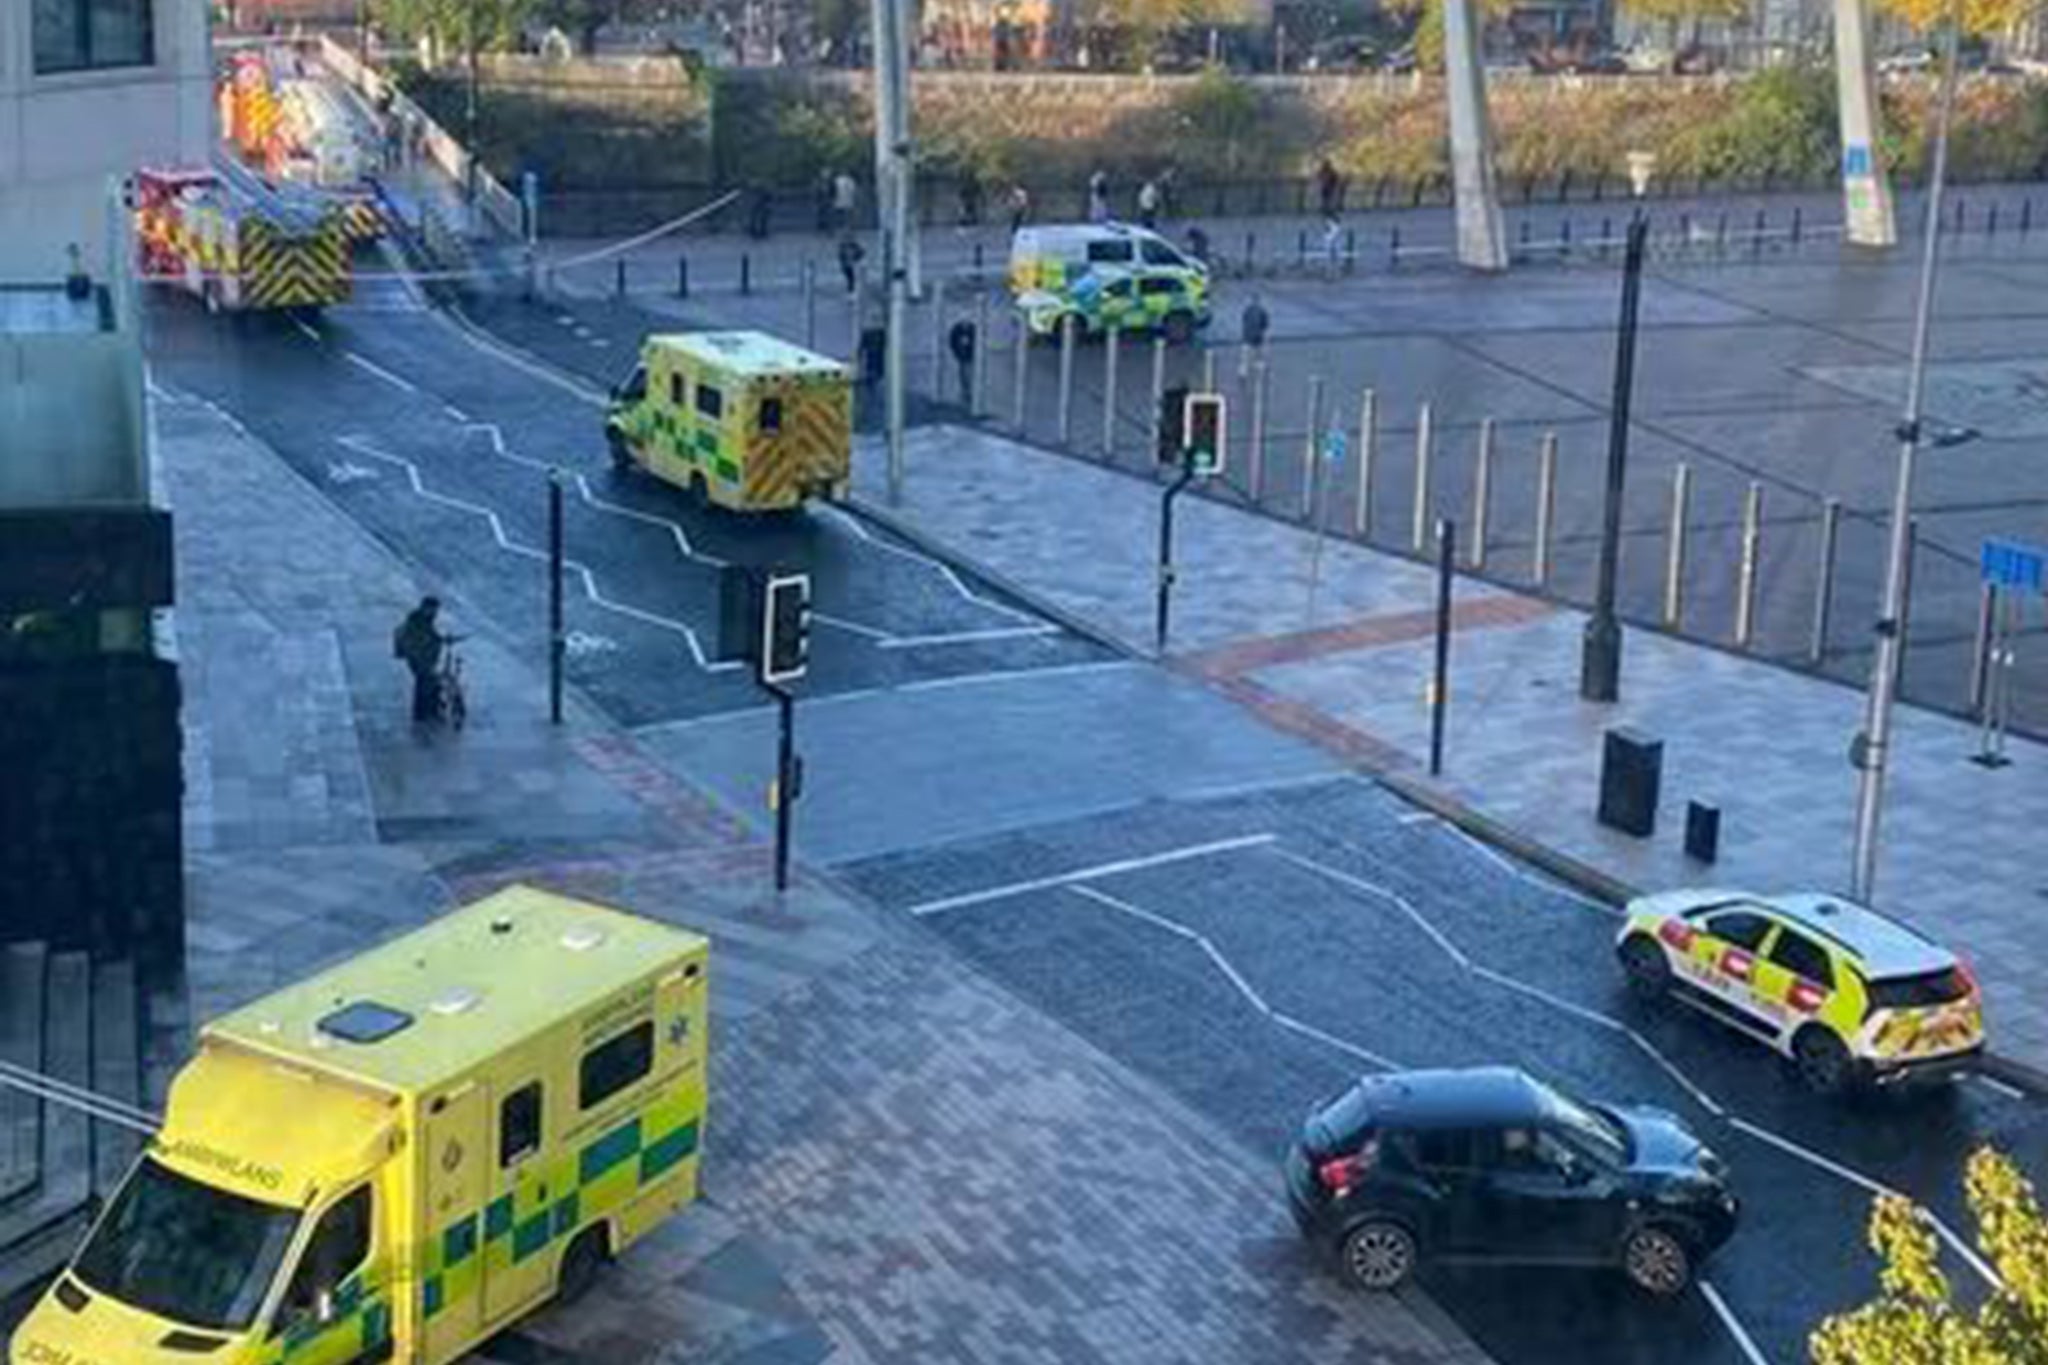 A river rescue is ongoing near Cardiff city centre